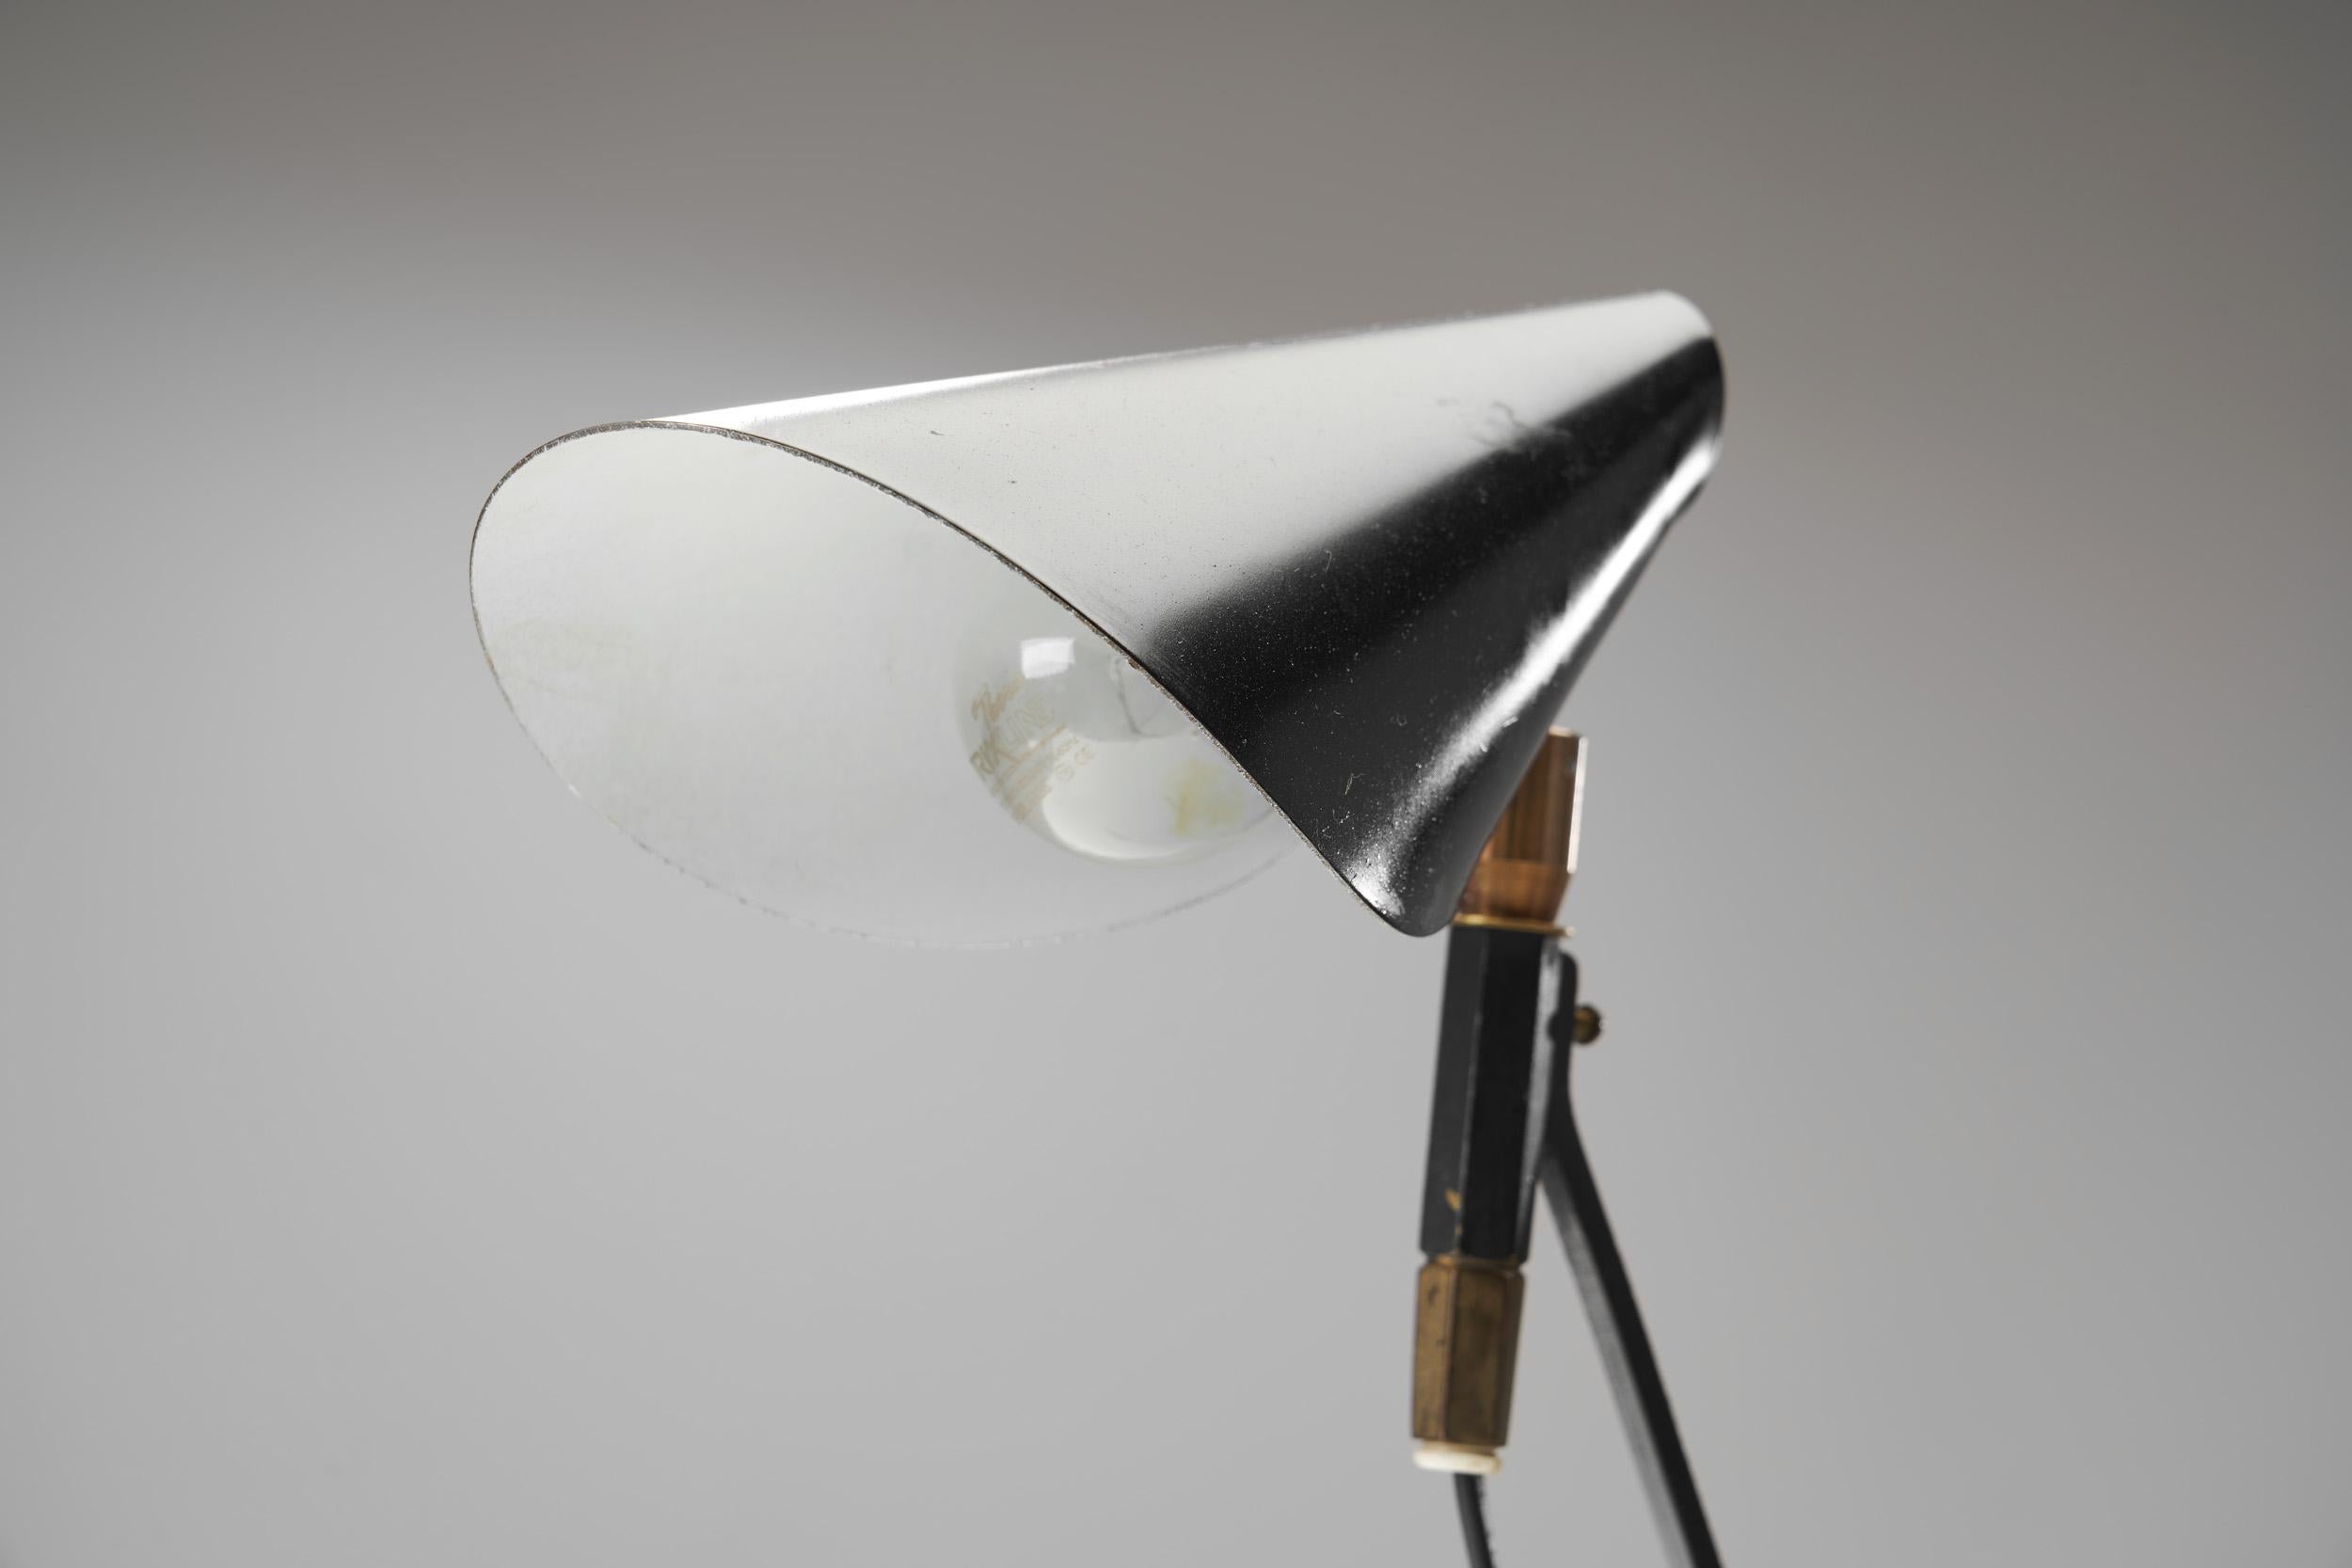 Lacquered Mid-Century Modern Table Lamp with Brass Details, Scandinavia ca 1960s For Sale 8